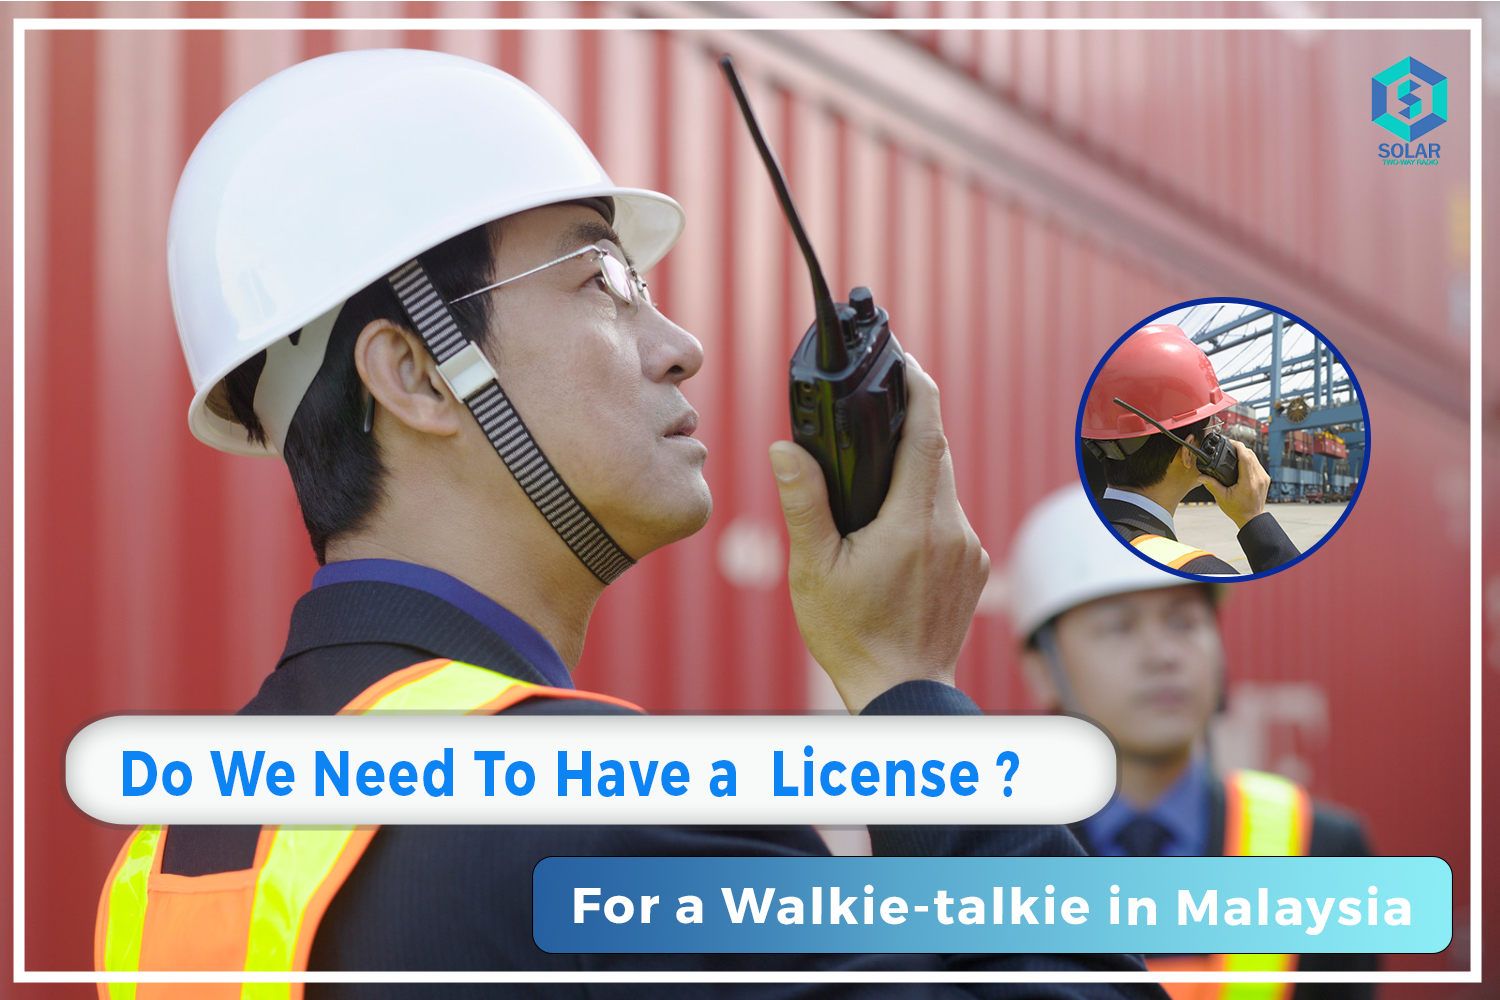 Do we need license for a walkie-talkie in Malaysia?